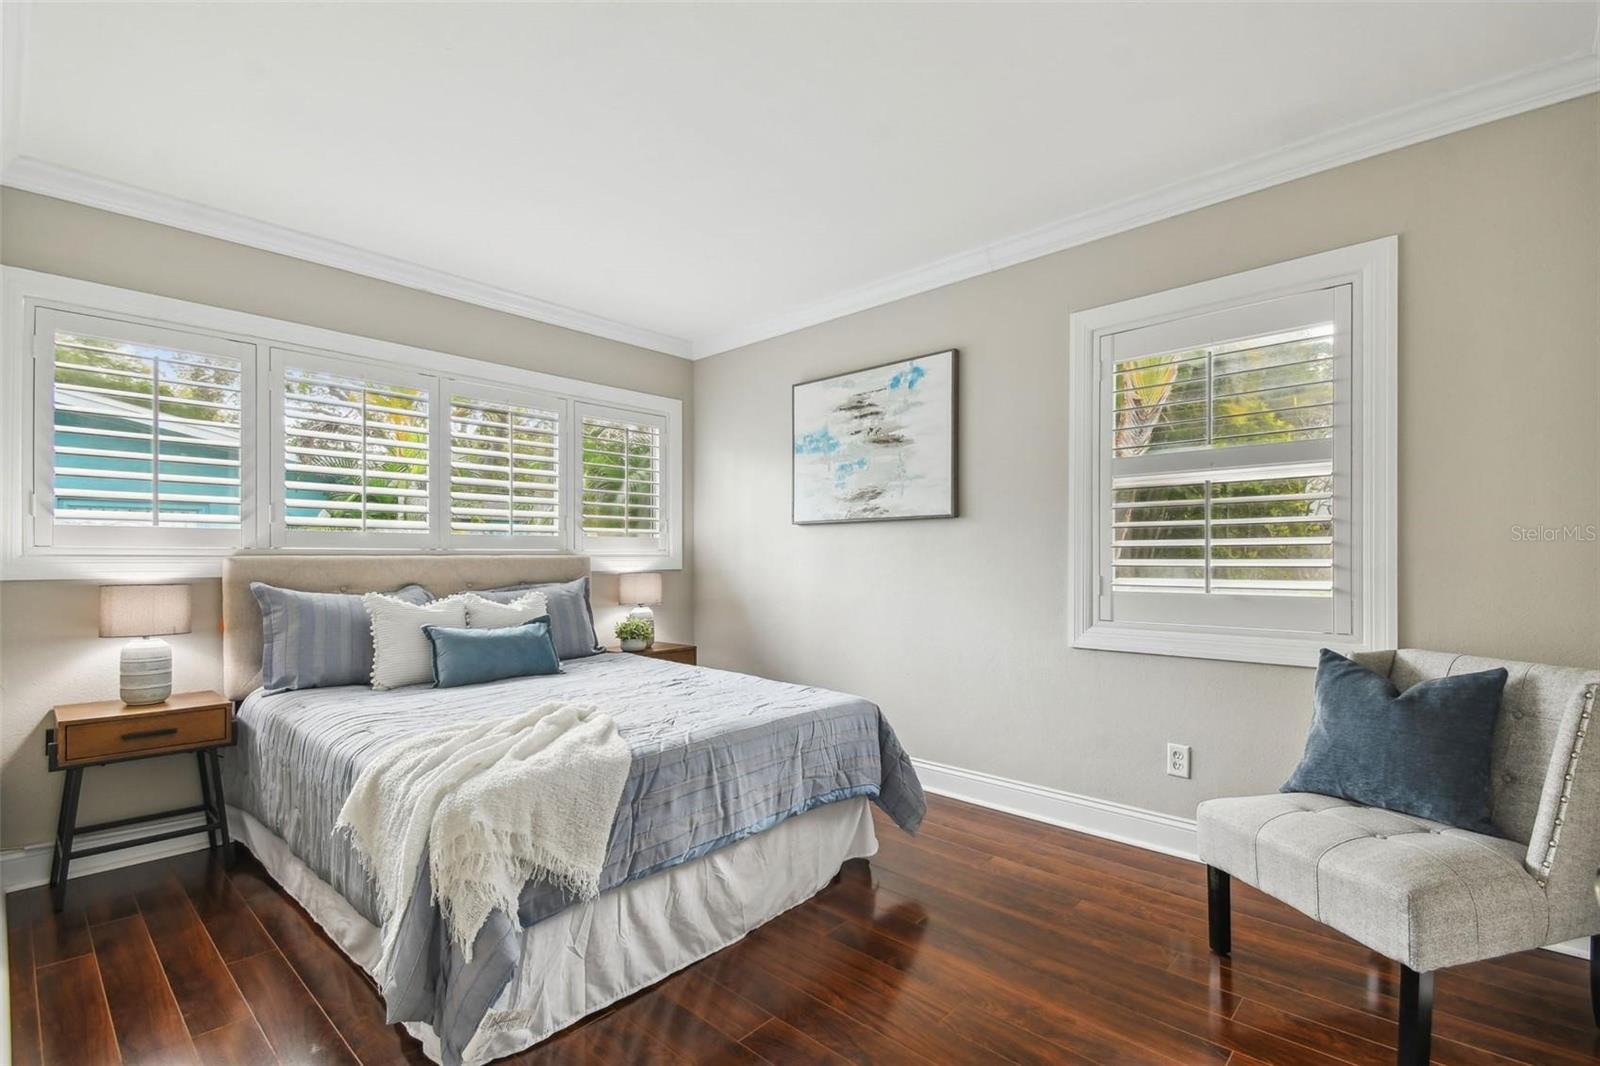 Bedroom with plantation shutters